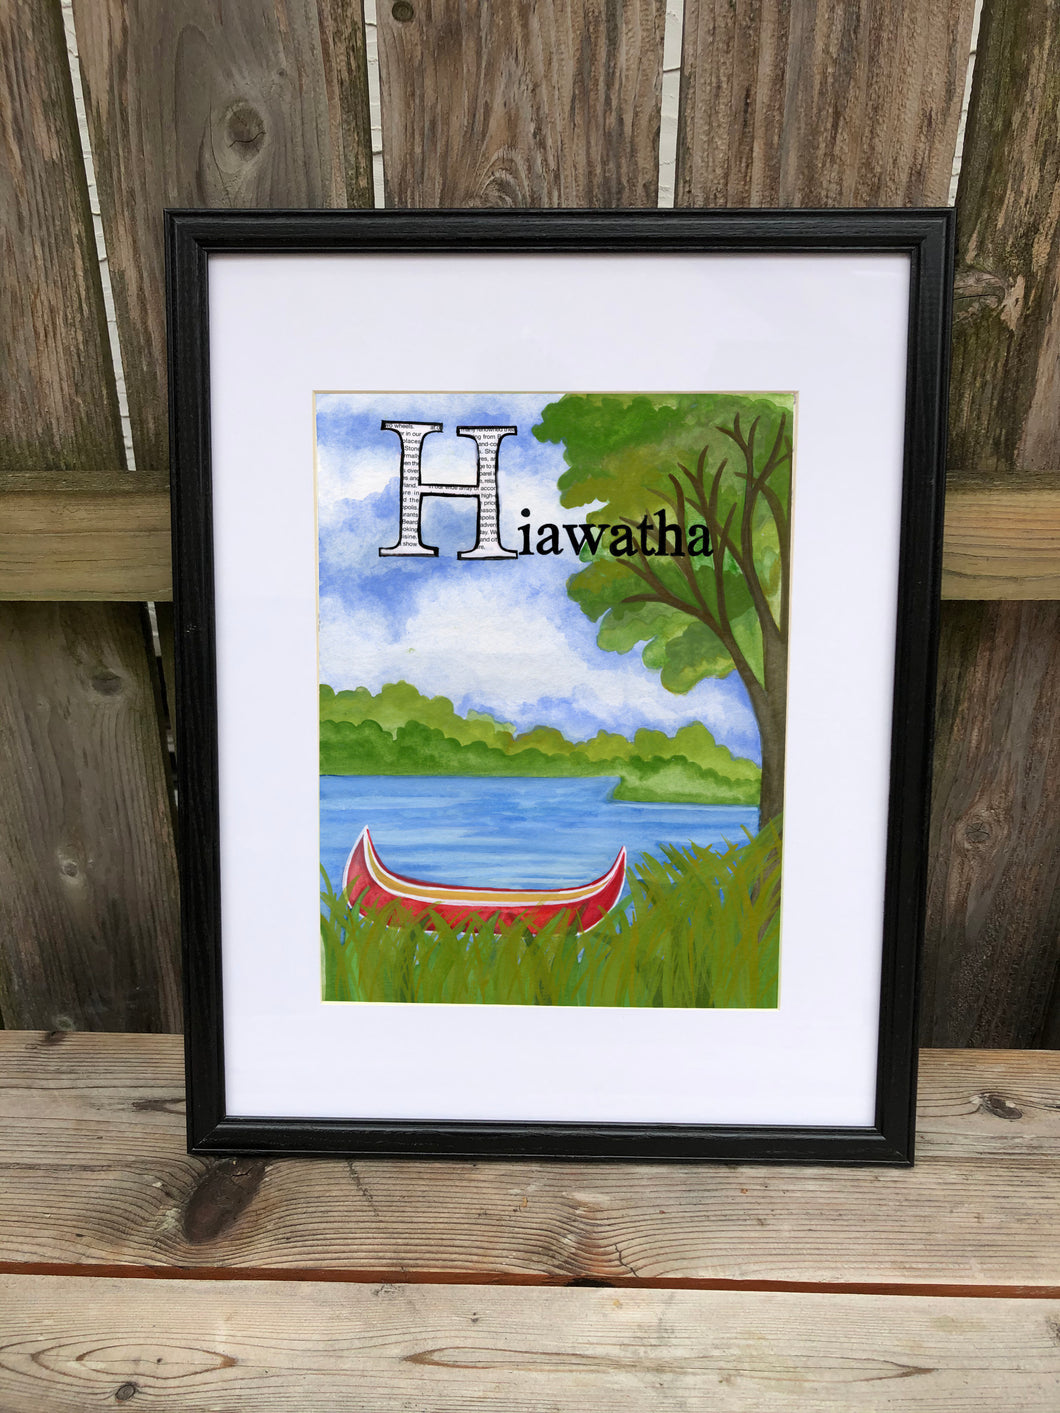 H is for Hiawatha - Original Framed Painting